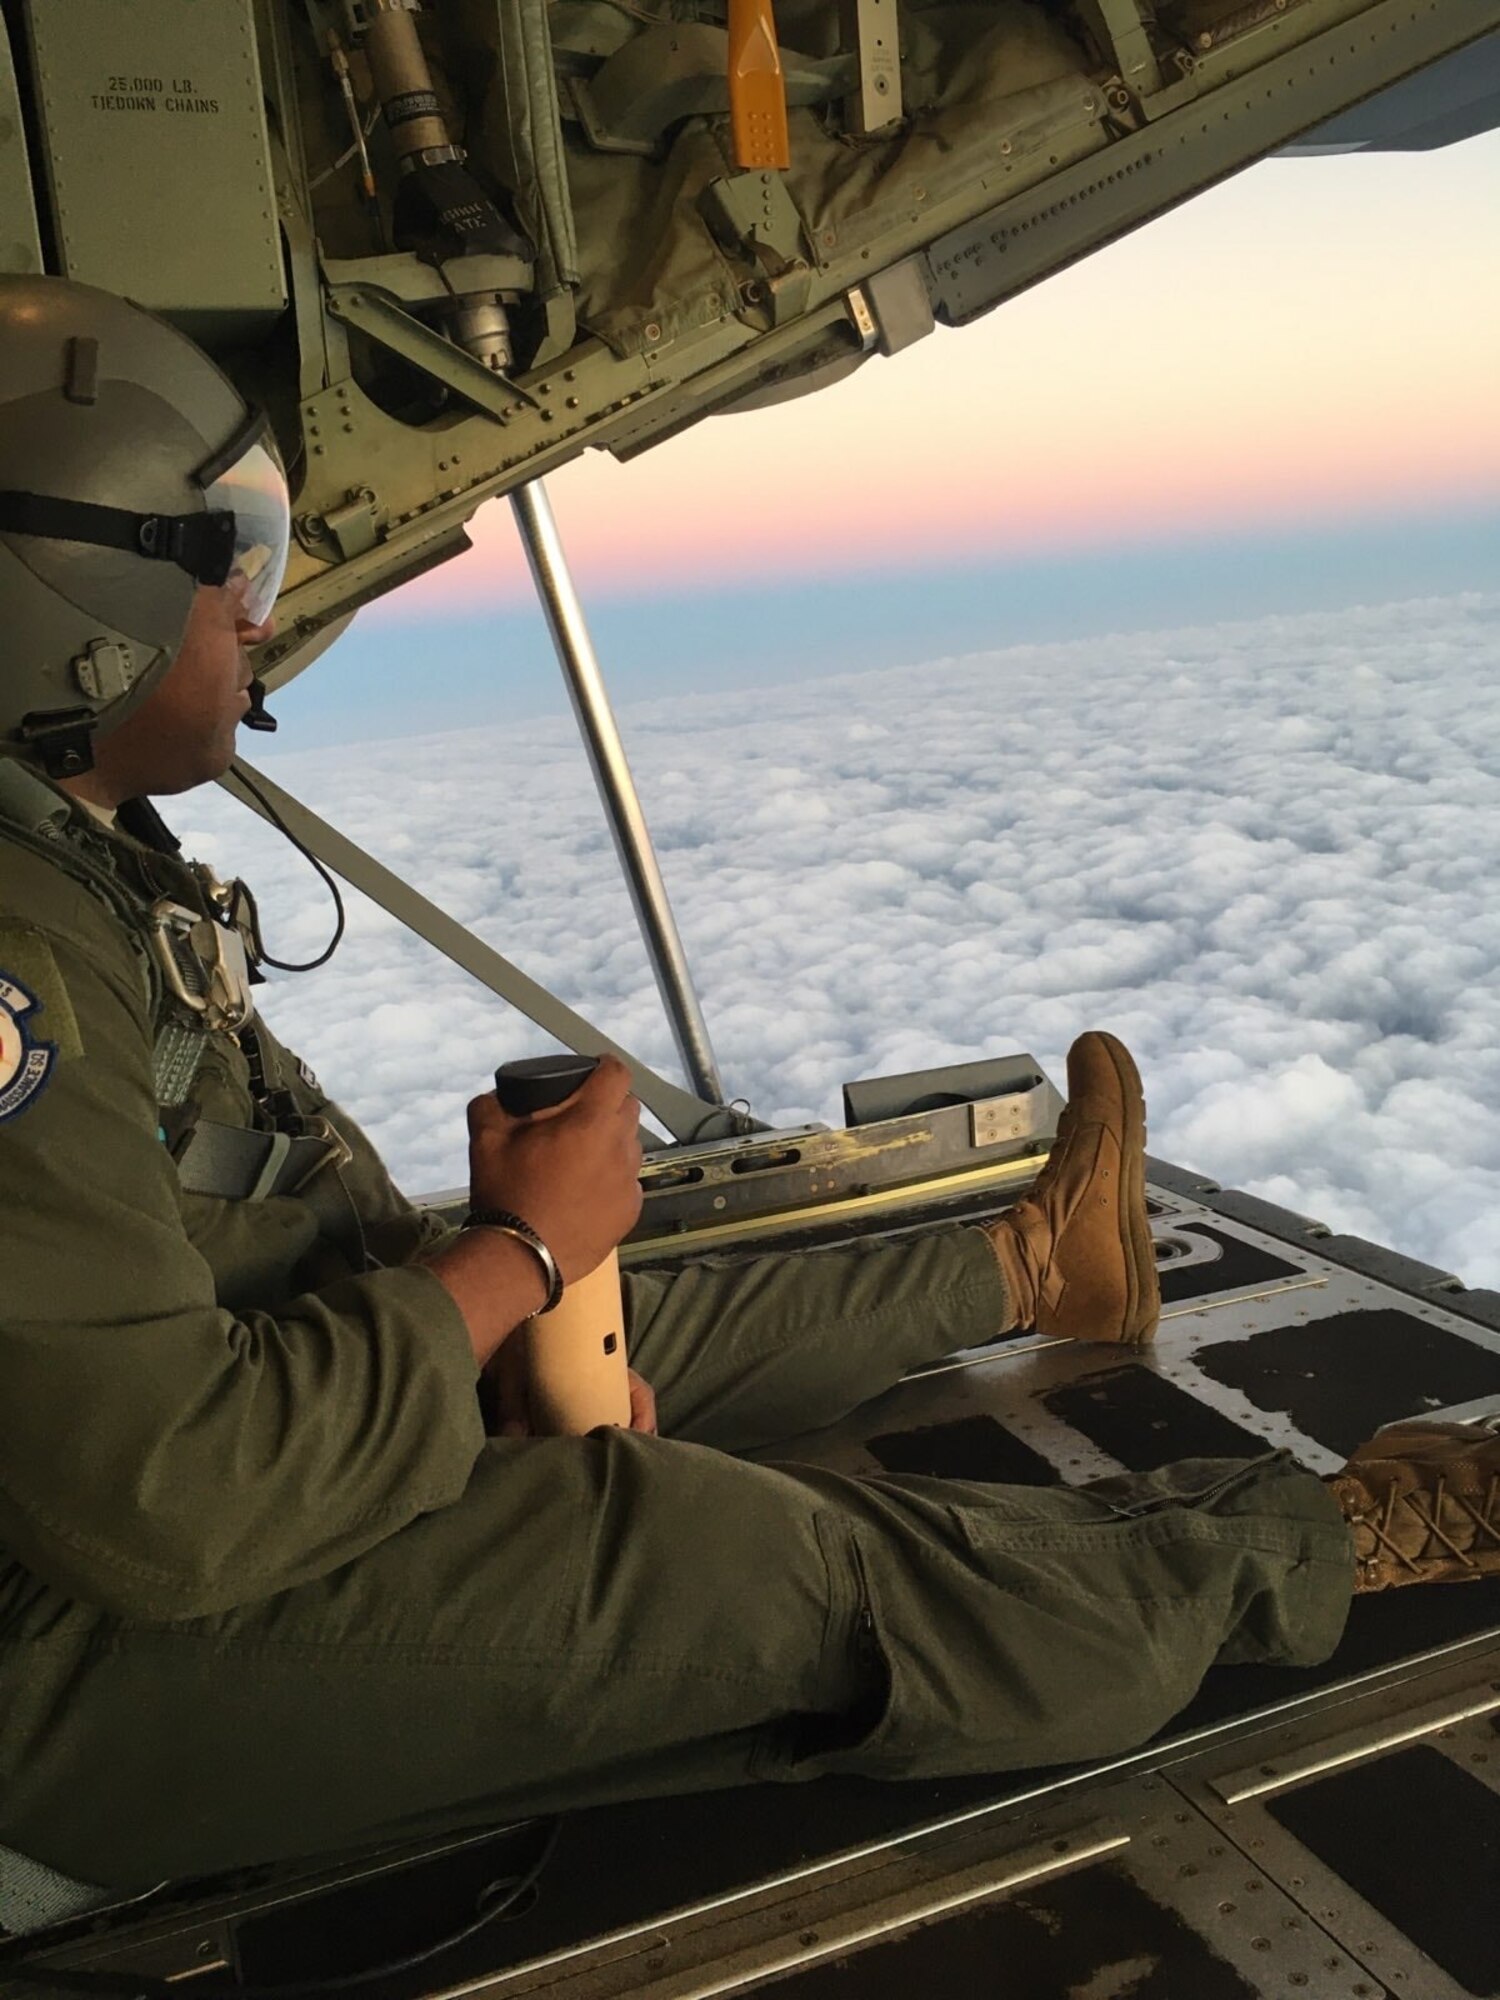 Tech. Sgt. Larry Banks, 53rd Weather Reconnaissance Squadron loadmaster, prepares to drop a simulated buoy from a WC-130J Super Hercules aircraft March 19, 2020, off the Gulf Coast of Mexico. The Hurricane Hunters train all year to maintain readiness. (U.S. Air Force photo by Tech. Sgt. Larry Banks)